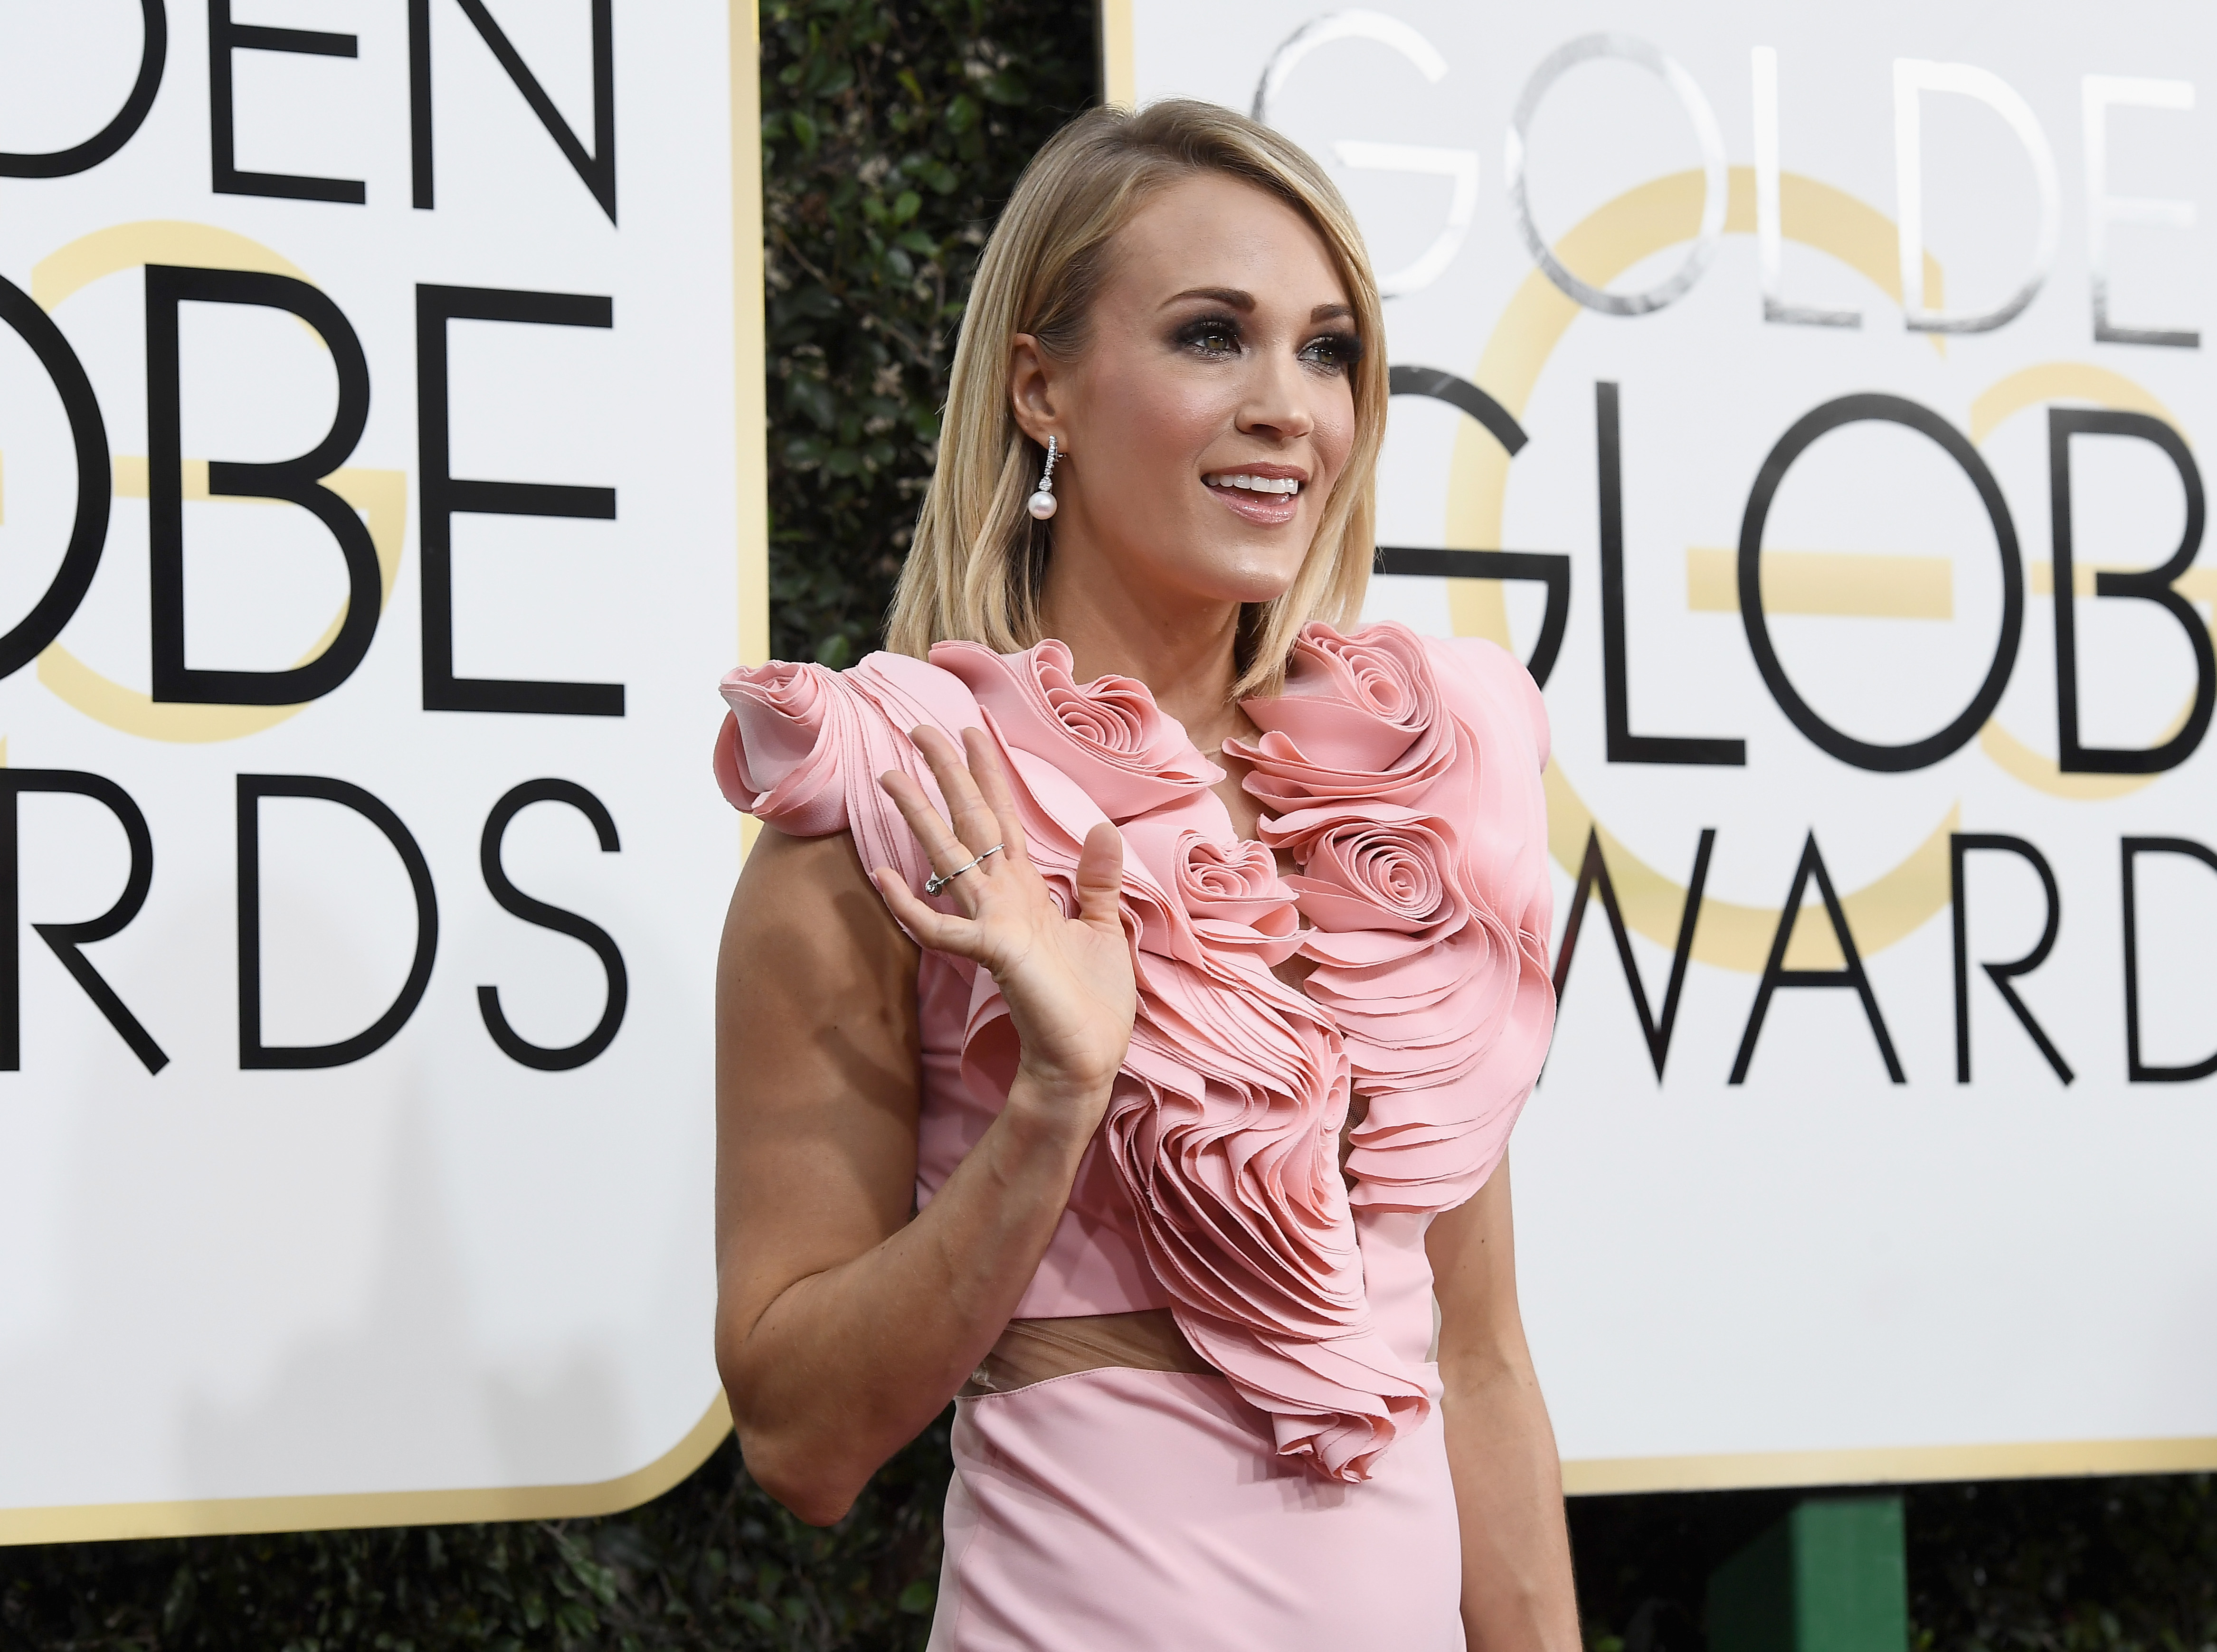 Carrie Underwood arrives at the 74th Annual Golden Globe Awards held at the Beverly Hilton Hotel on January 8, 2017. | Source: Getty Images